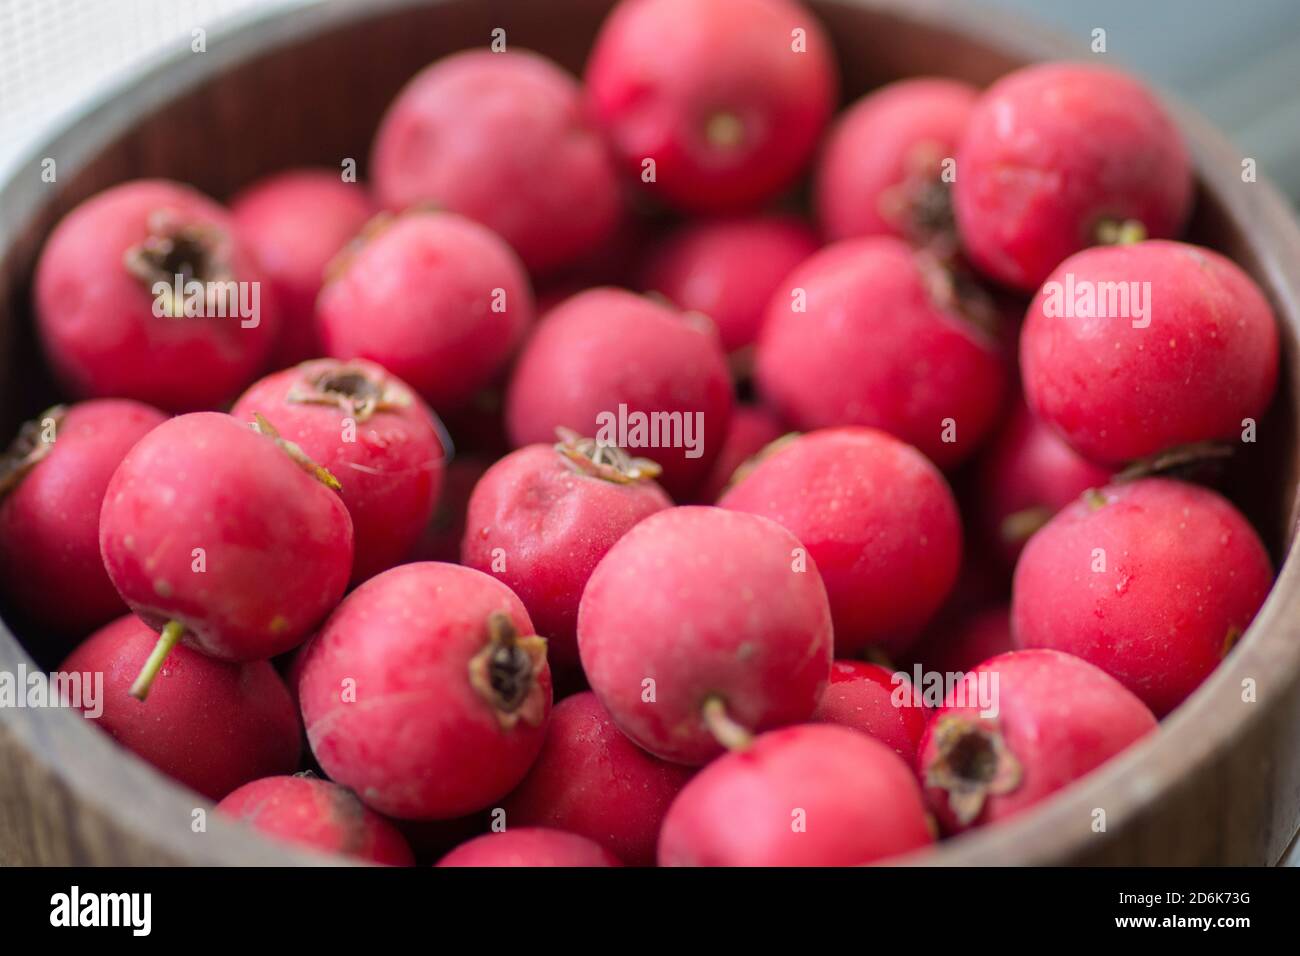 Red Scarlet Hawthorn fruits (Crataegus coccinea), piled up in wooden bowl Stock Photo